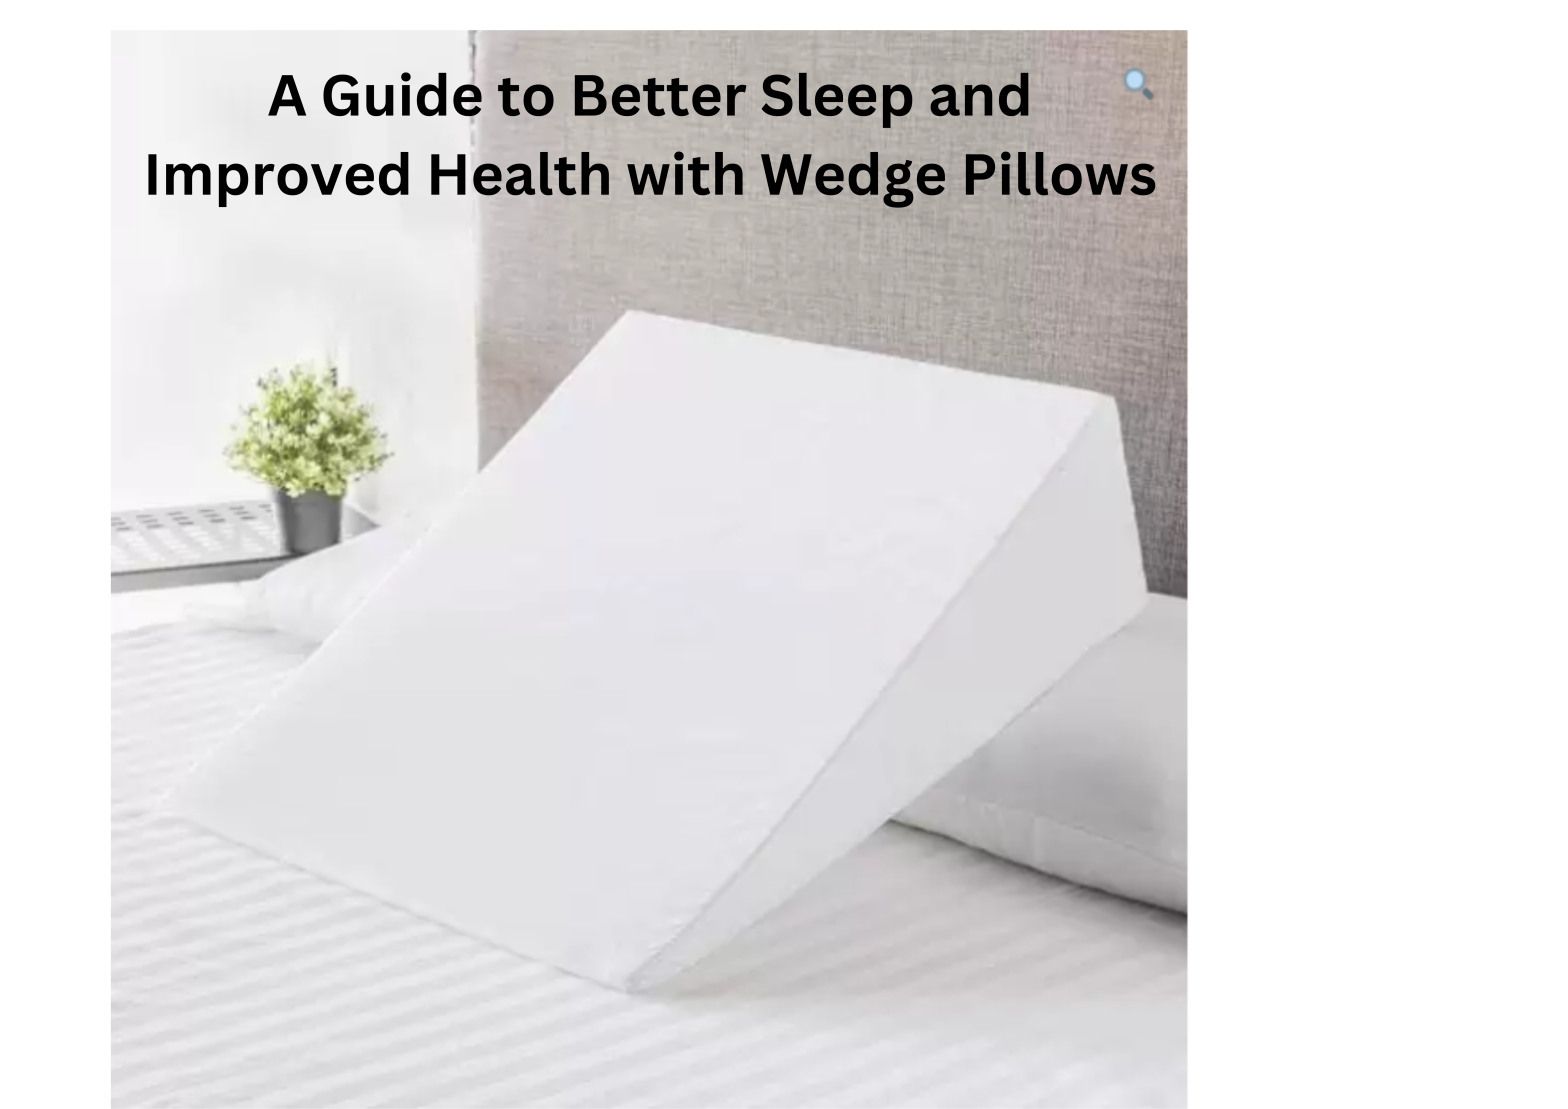 A Guide to Better Sleep and Improved Health with Wedge Pillows